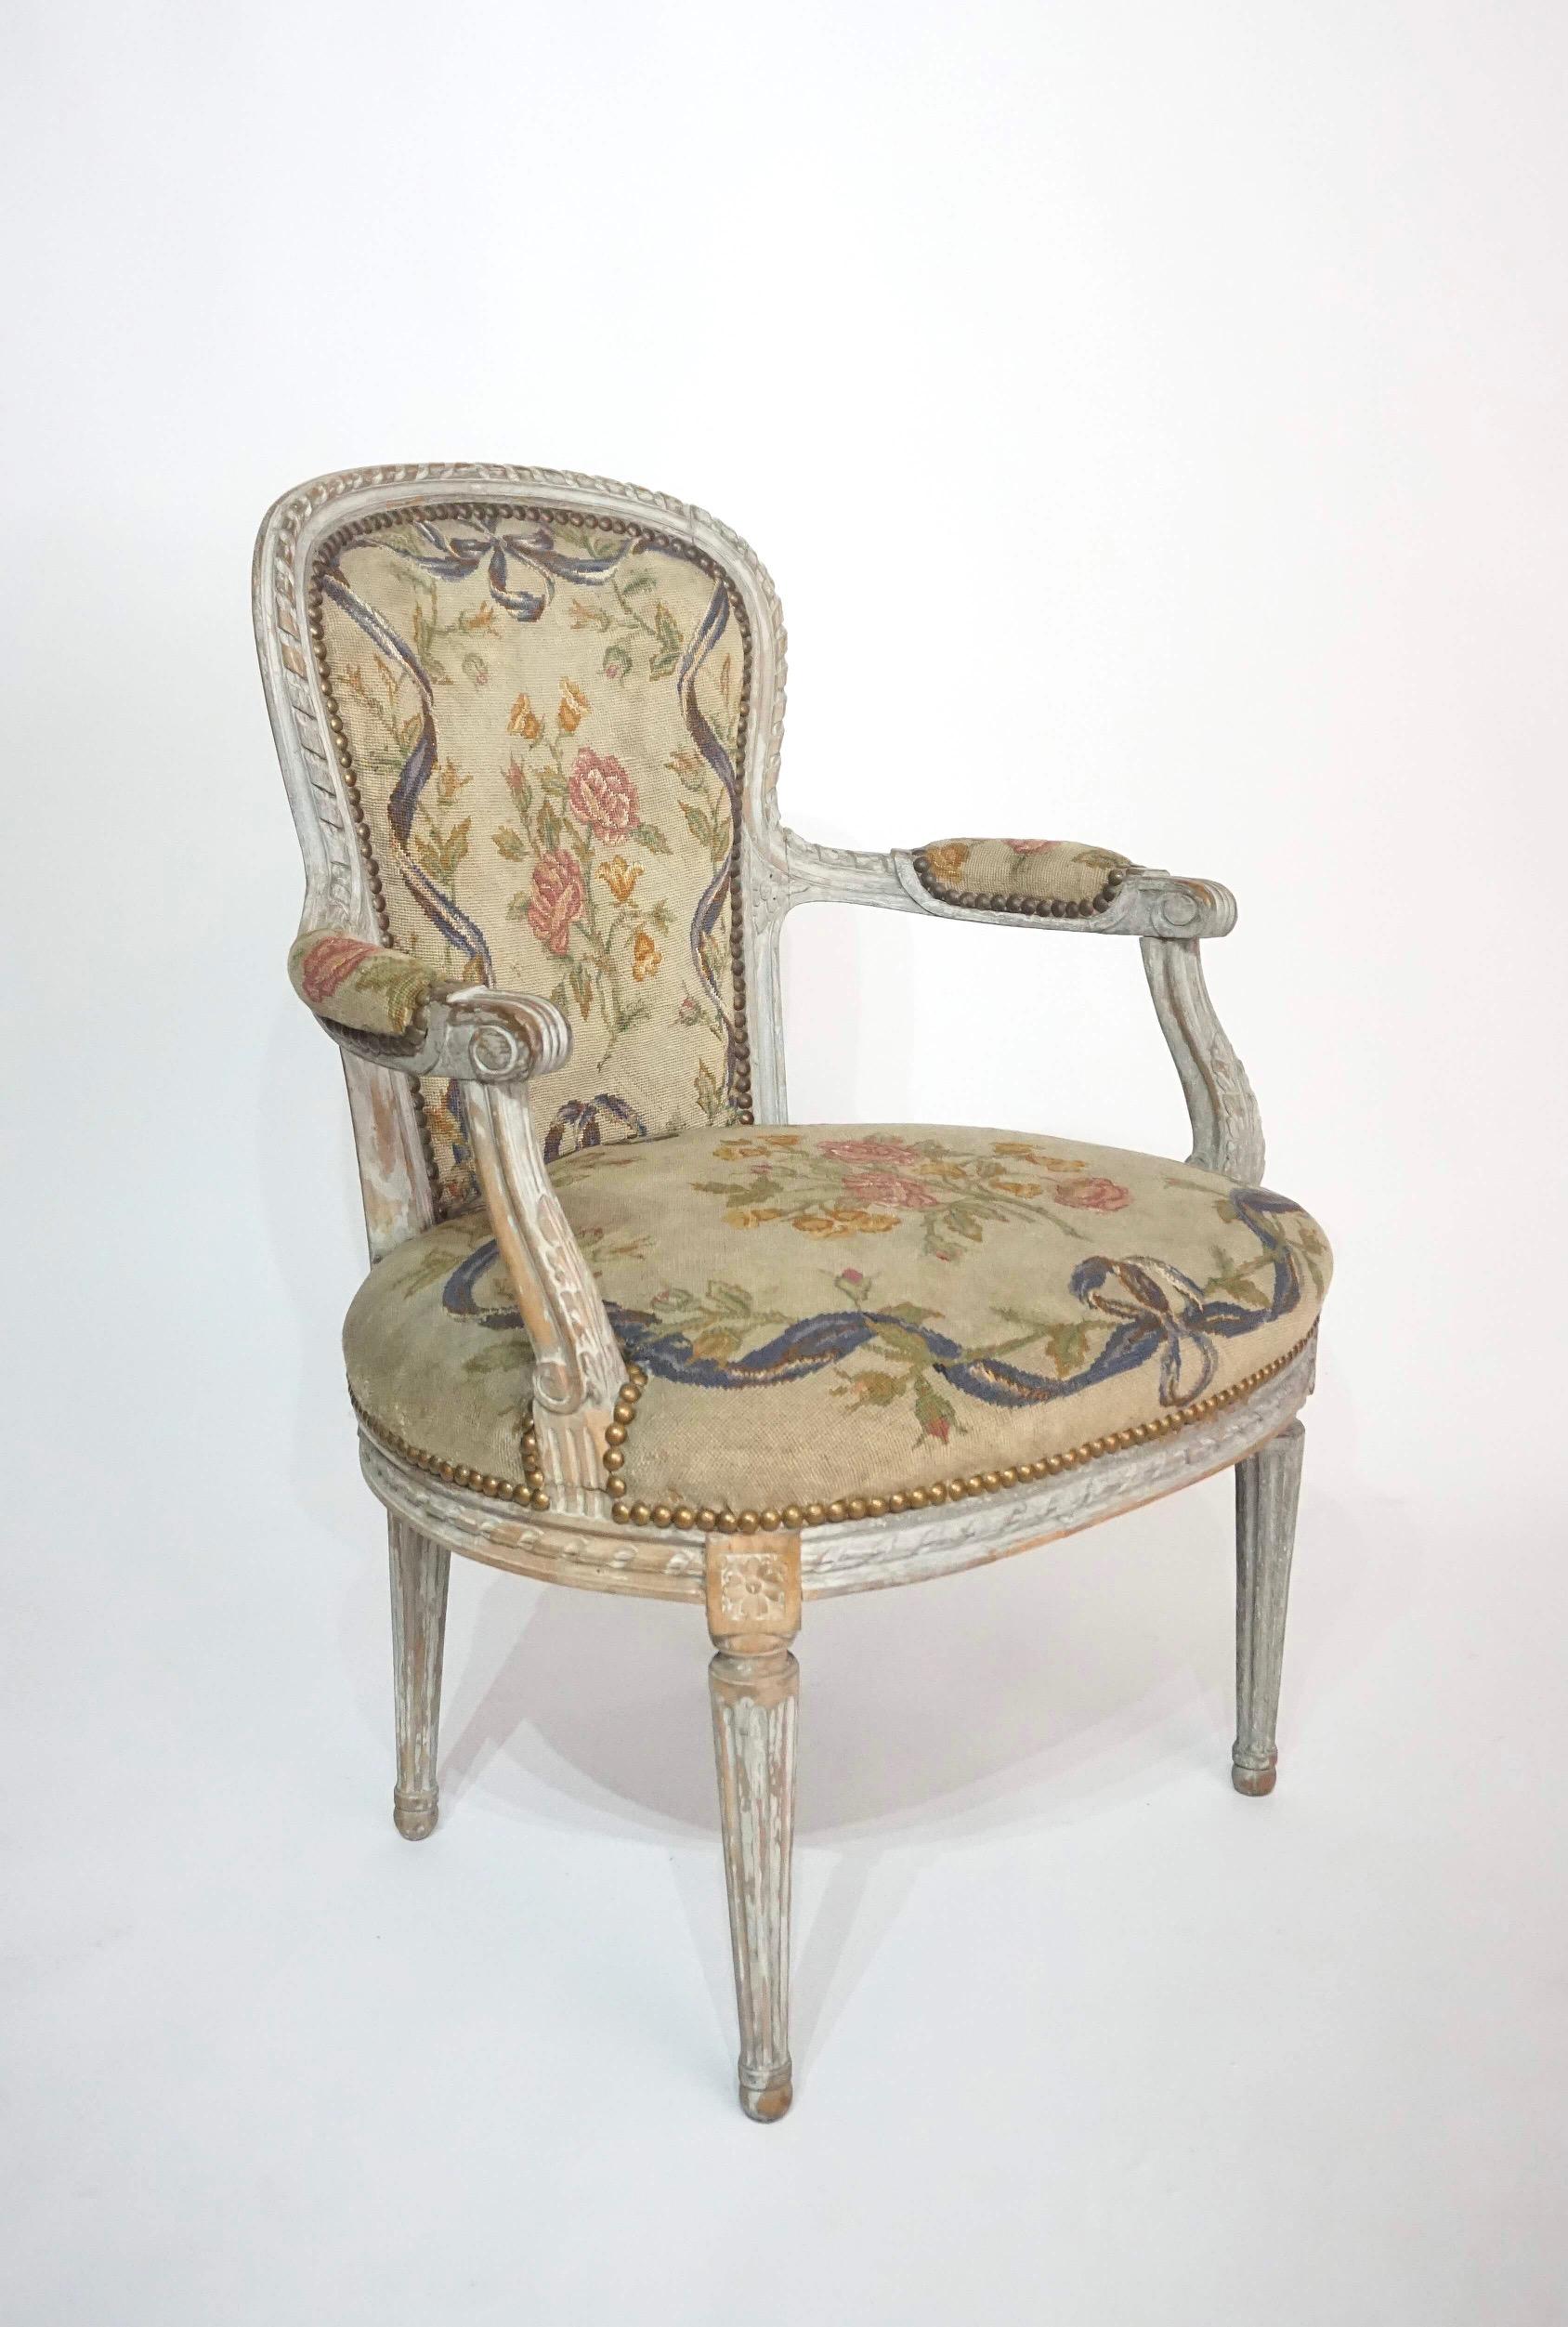 A wonderful circa 1770 French provincial Louis XVI fauteuil in original 'gris' paint, the narrow back and wide seat (typically connoting a ladies chair for gowns) having late 19th century floral and ribbon needlepoint tapestry upholstery.